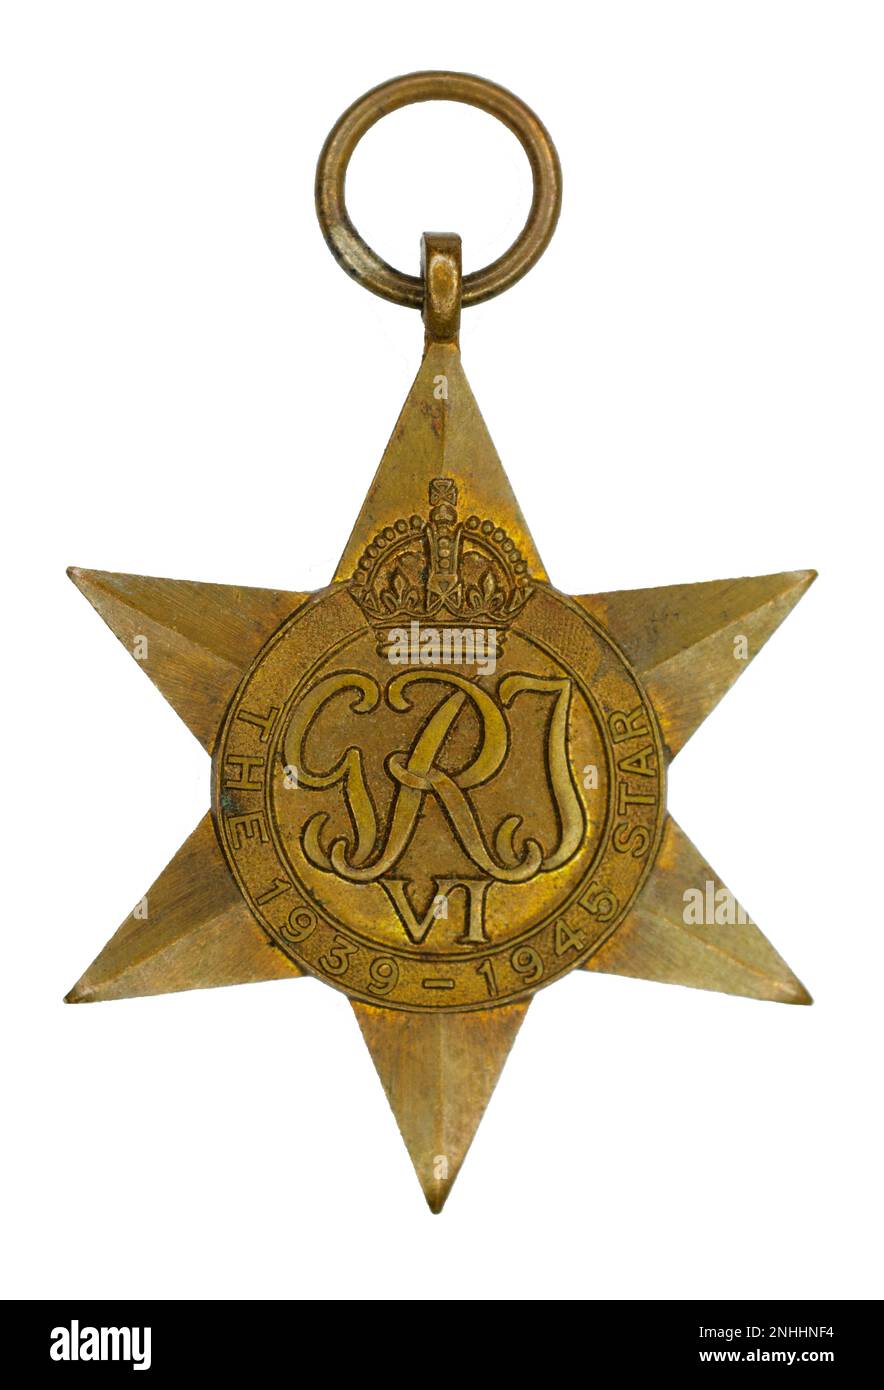 A British Second World War campaign medal, Tthe 1939-1945 Star. Stock Photo